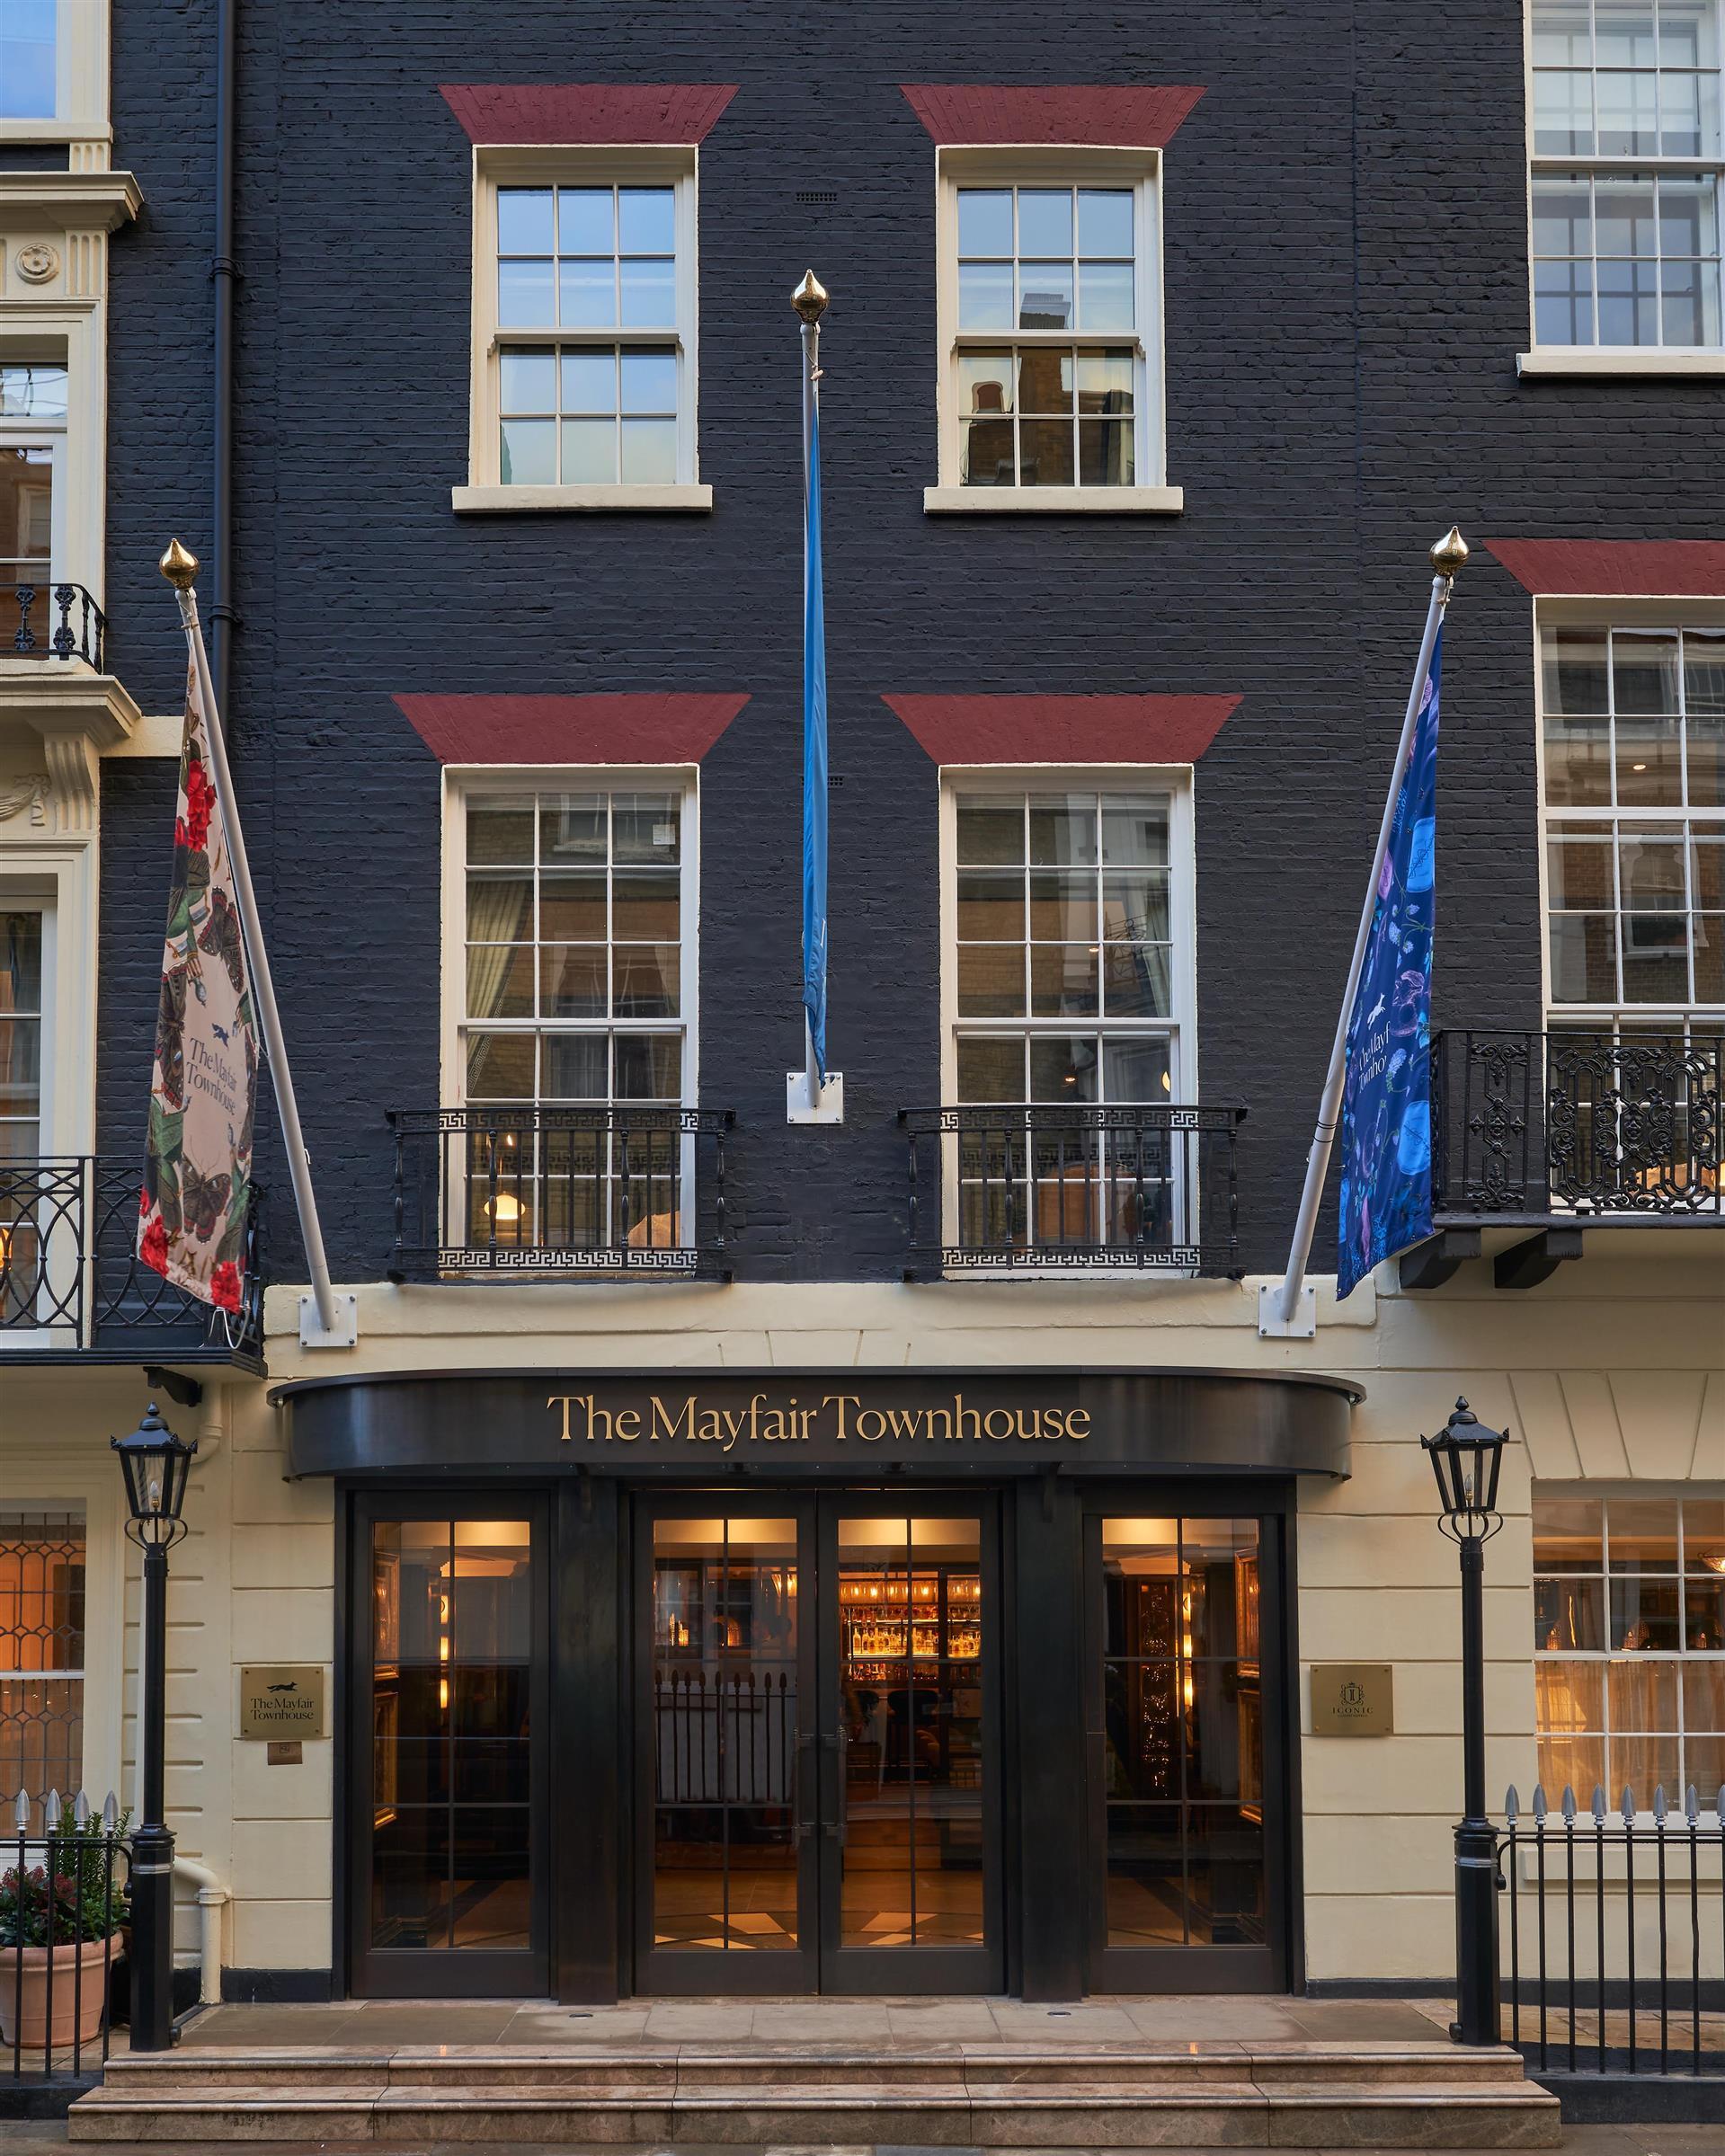 The Mayfair Townhouse in London, GB1